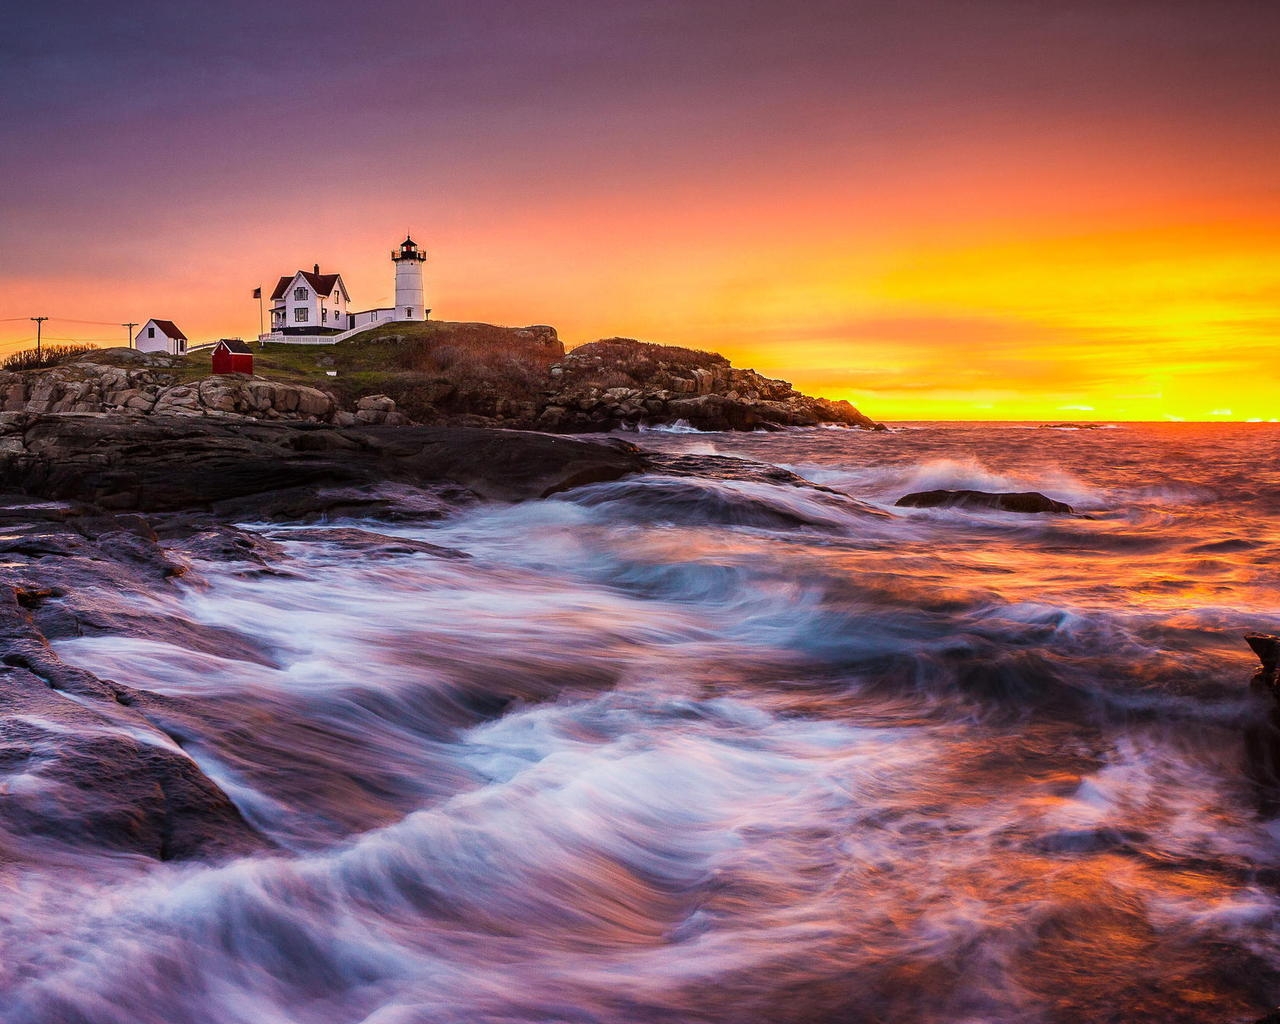 Lighthouse on Rocks for 1280 x 1024 resolution